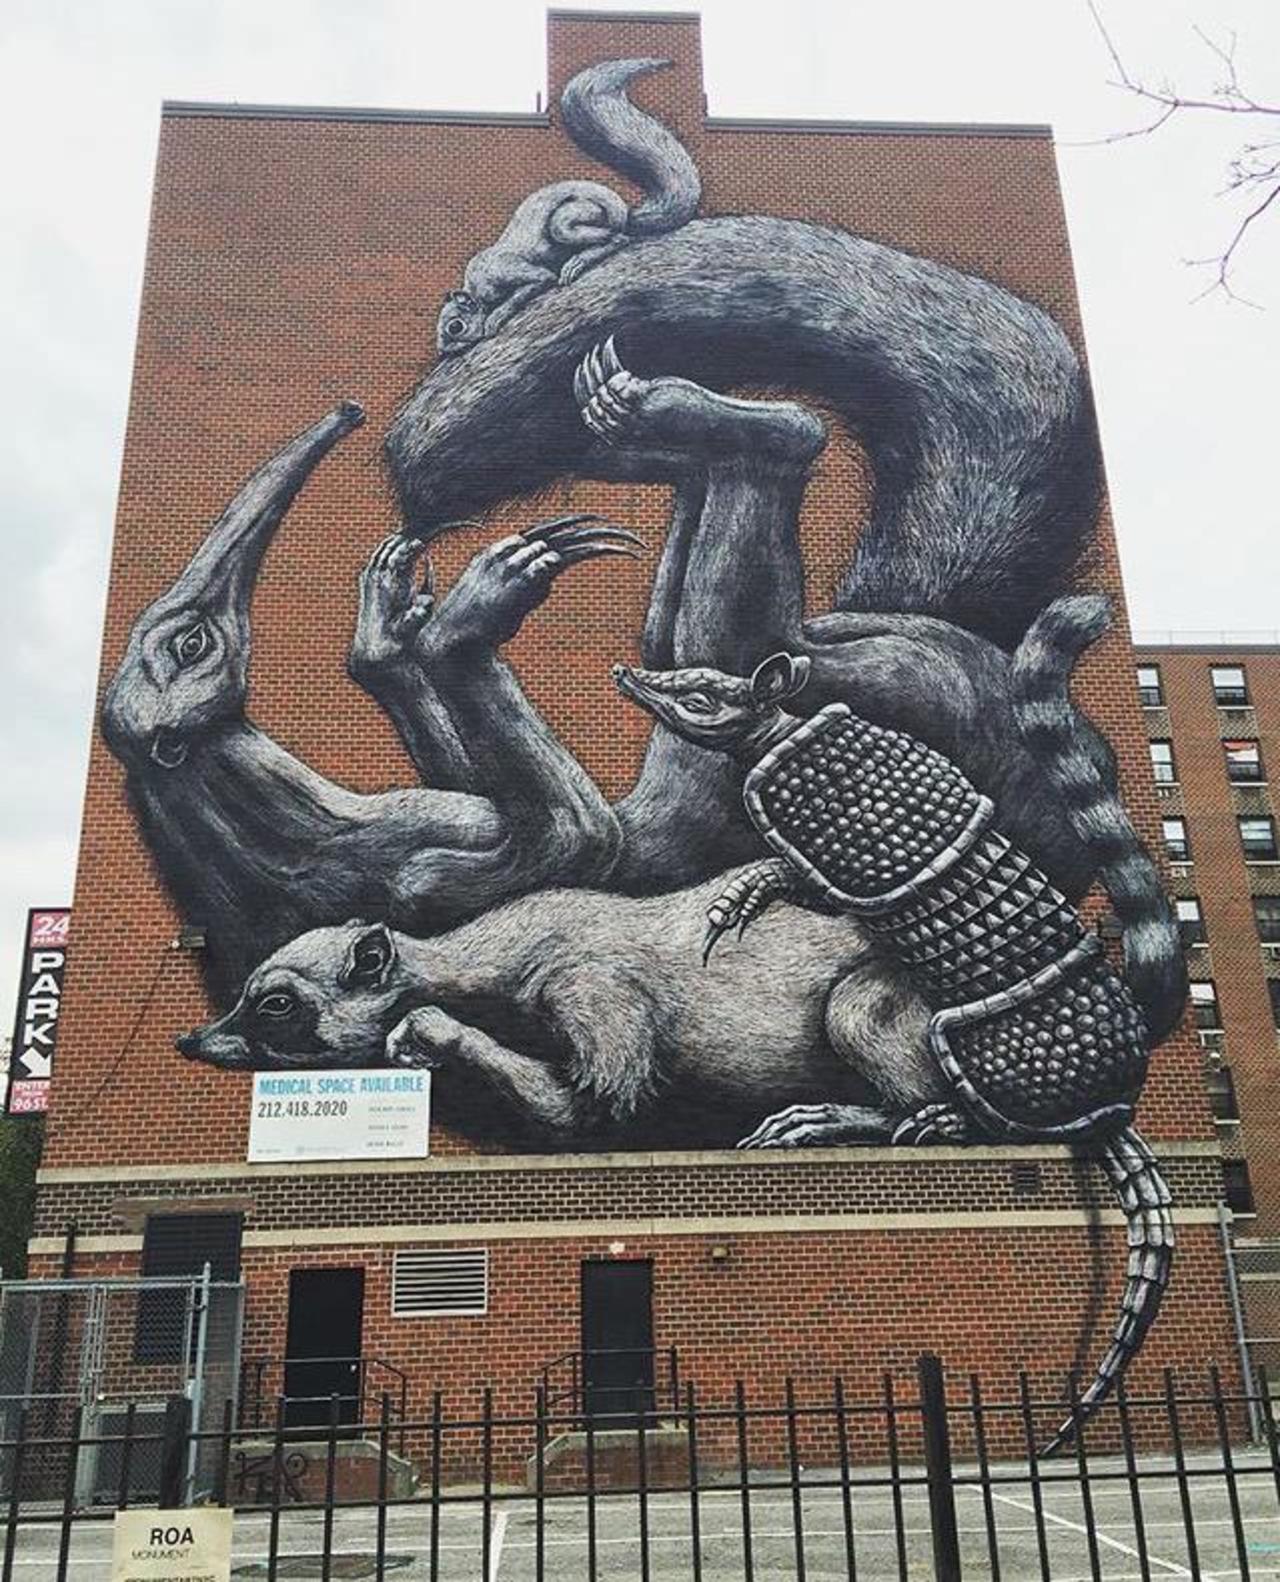 The completed new large scale Street Art wall by ROA in NYC

#art #graffiti #mural #streetart http://t.co/Tx2xS3rYOB